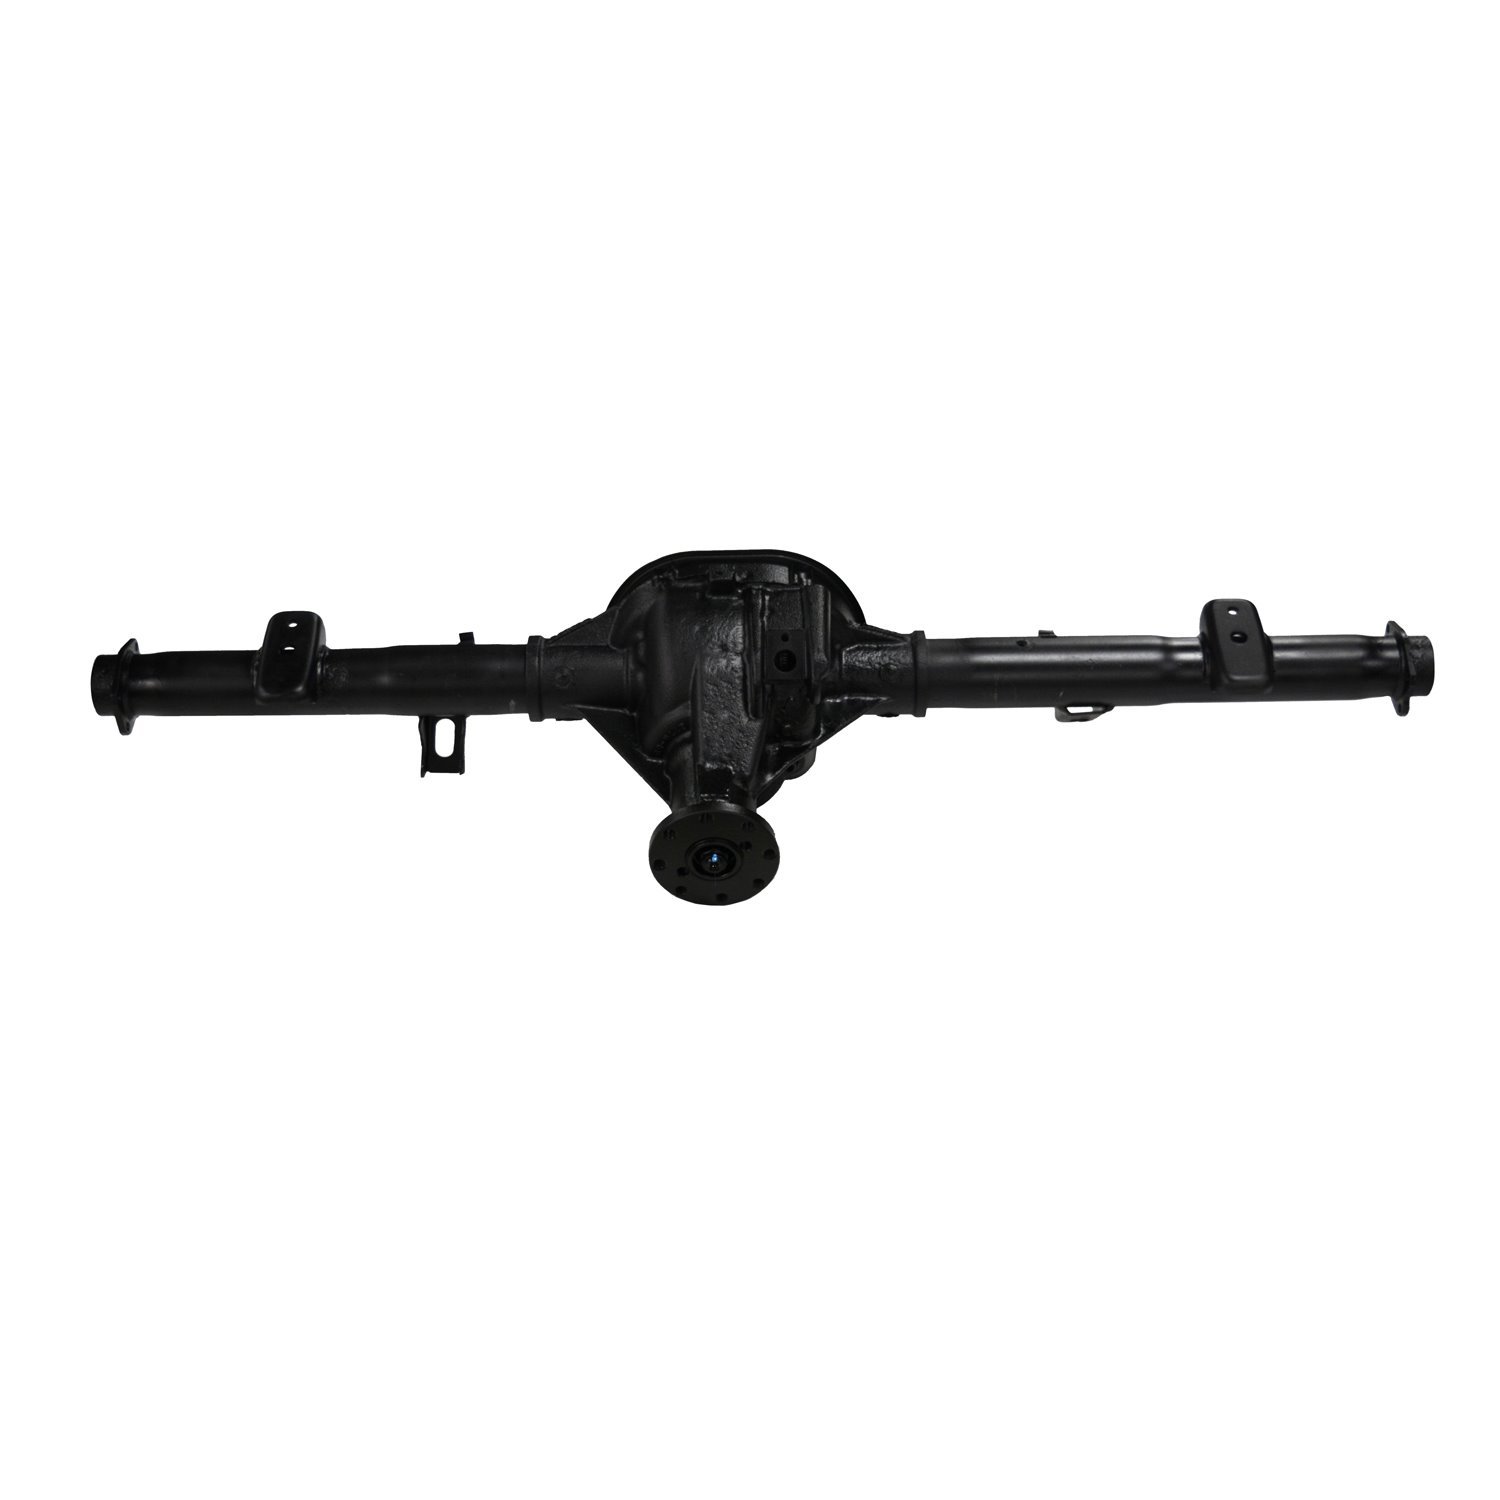 Remanufactured Complete Axle Assembly for 7.5" 99-05 Ranger 3.73 , 9" Drum Brakes